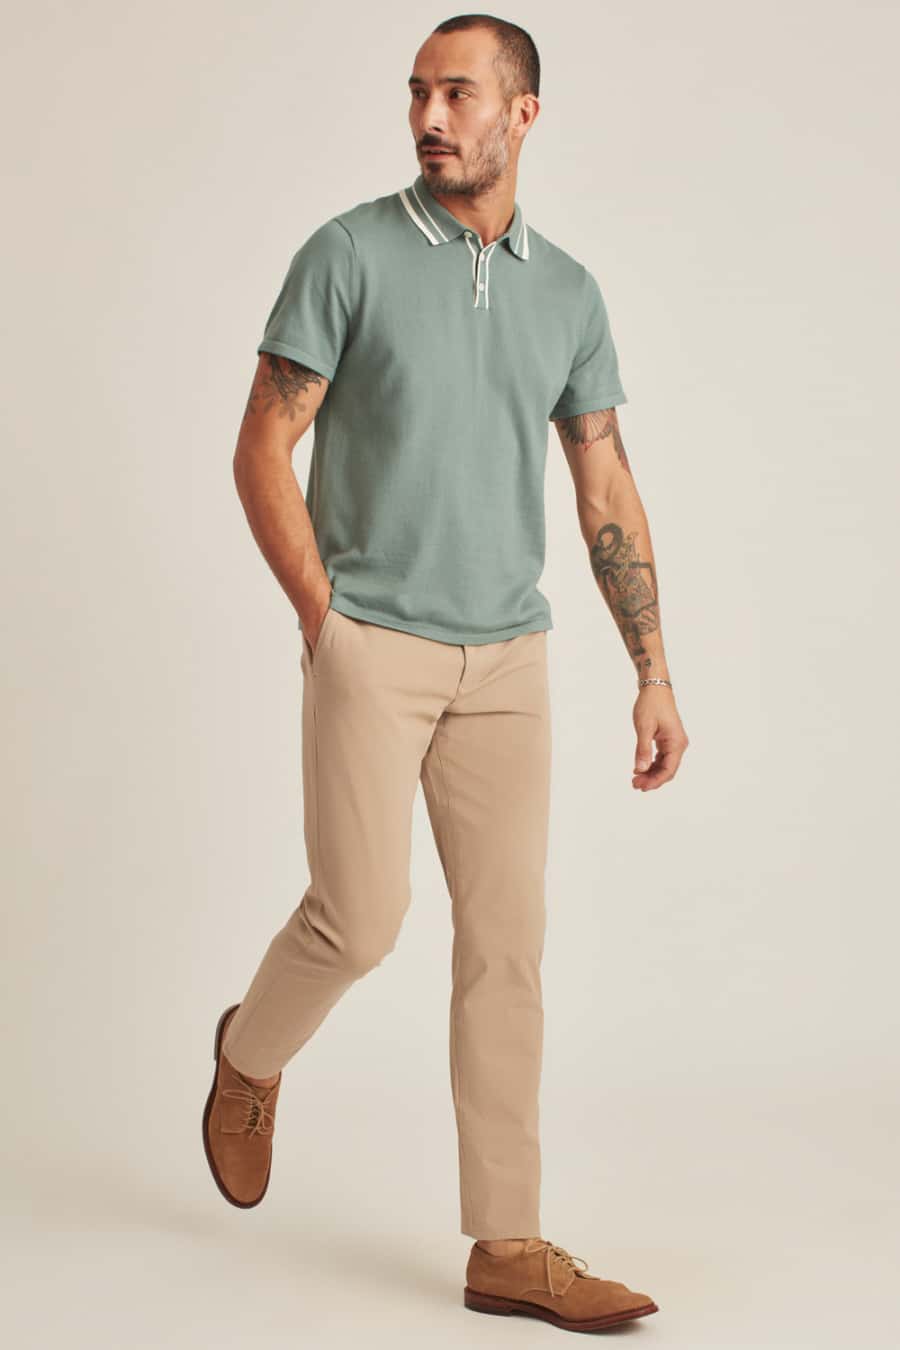 Men's khaki pants, green knitted polo shirt and suede Derby shoes outfit